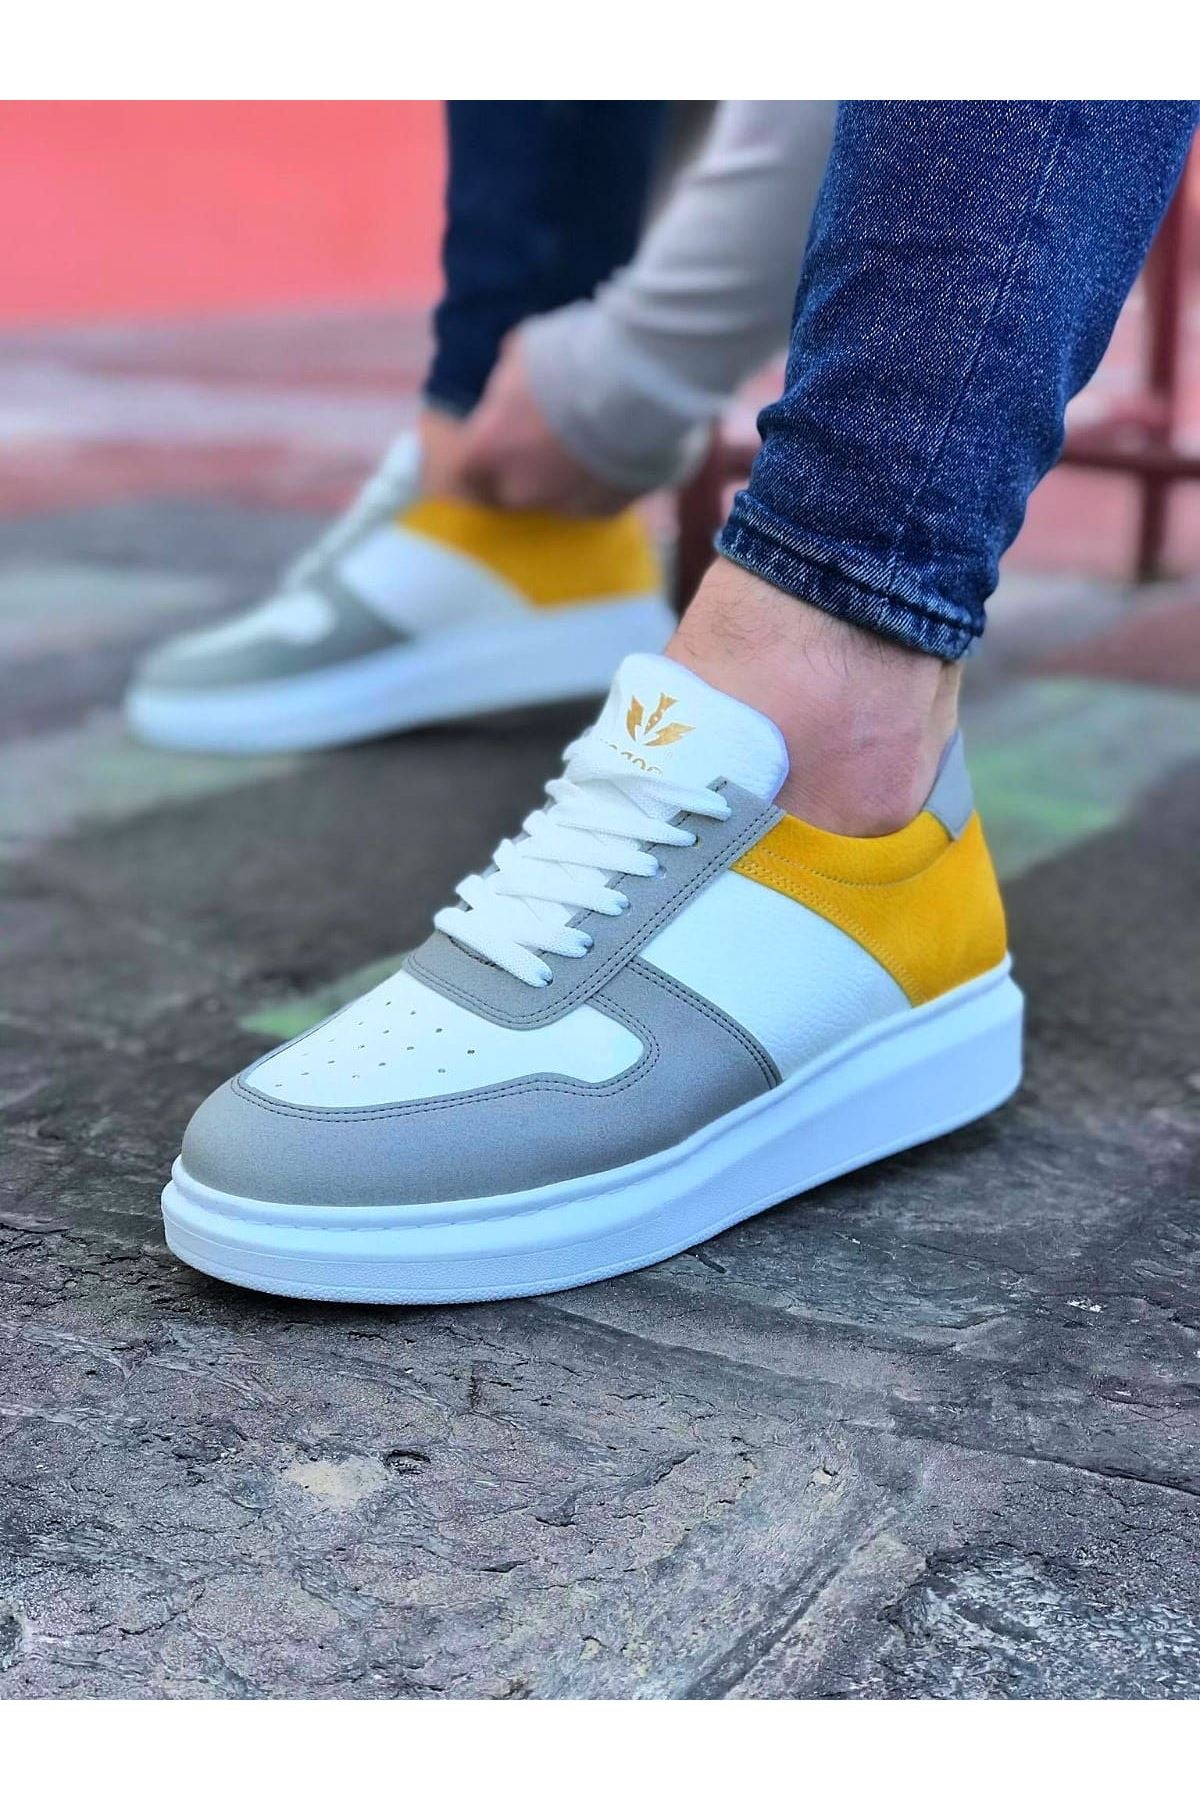 WG011 White Yellow Men's Casual Shoes - STREETMODE™